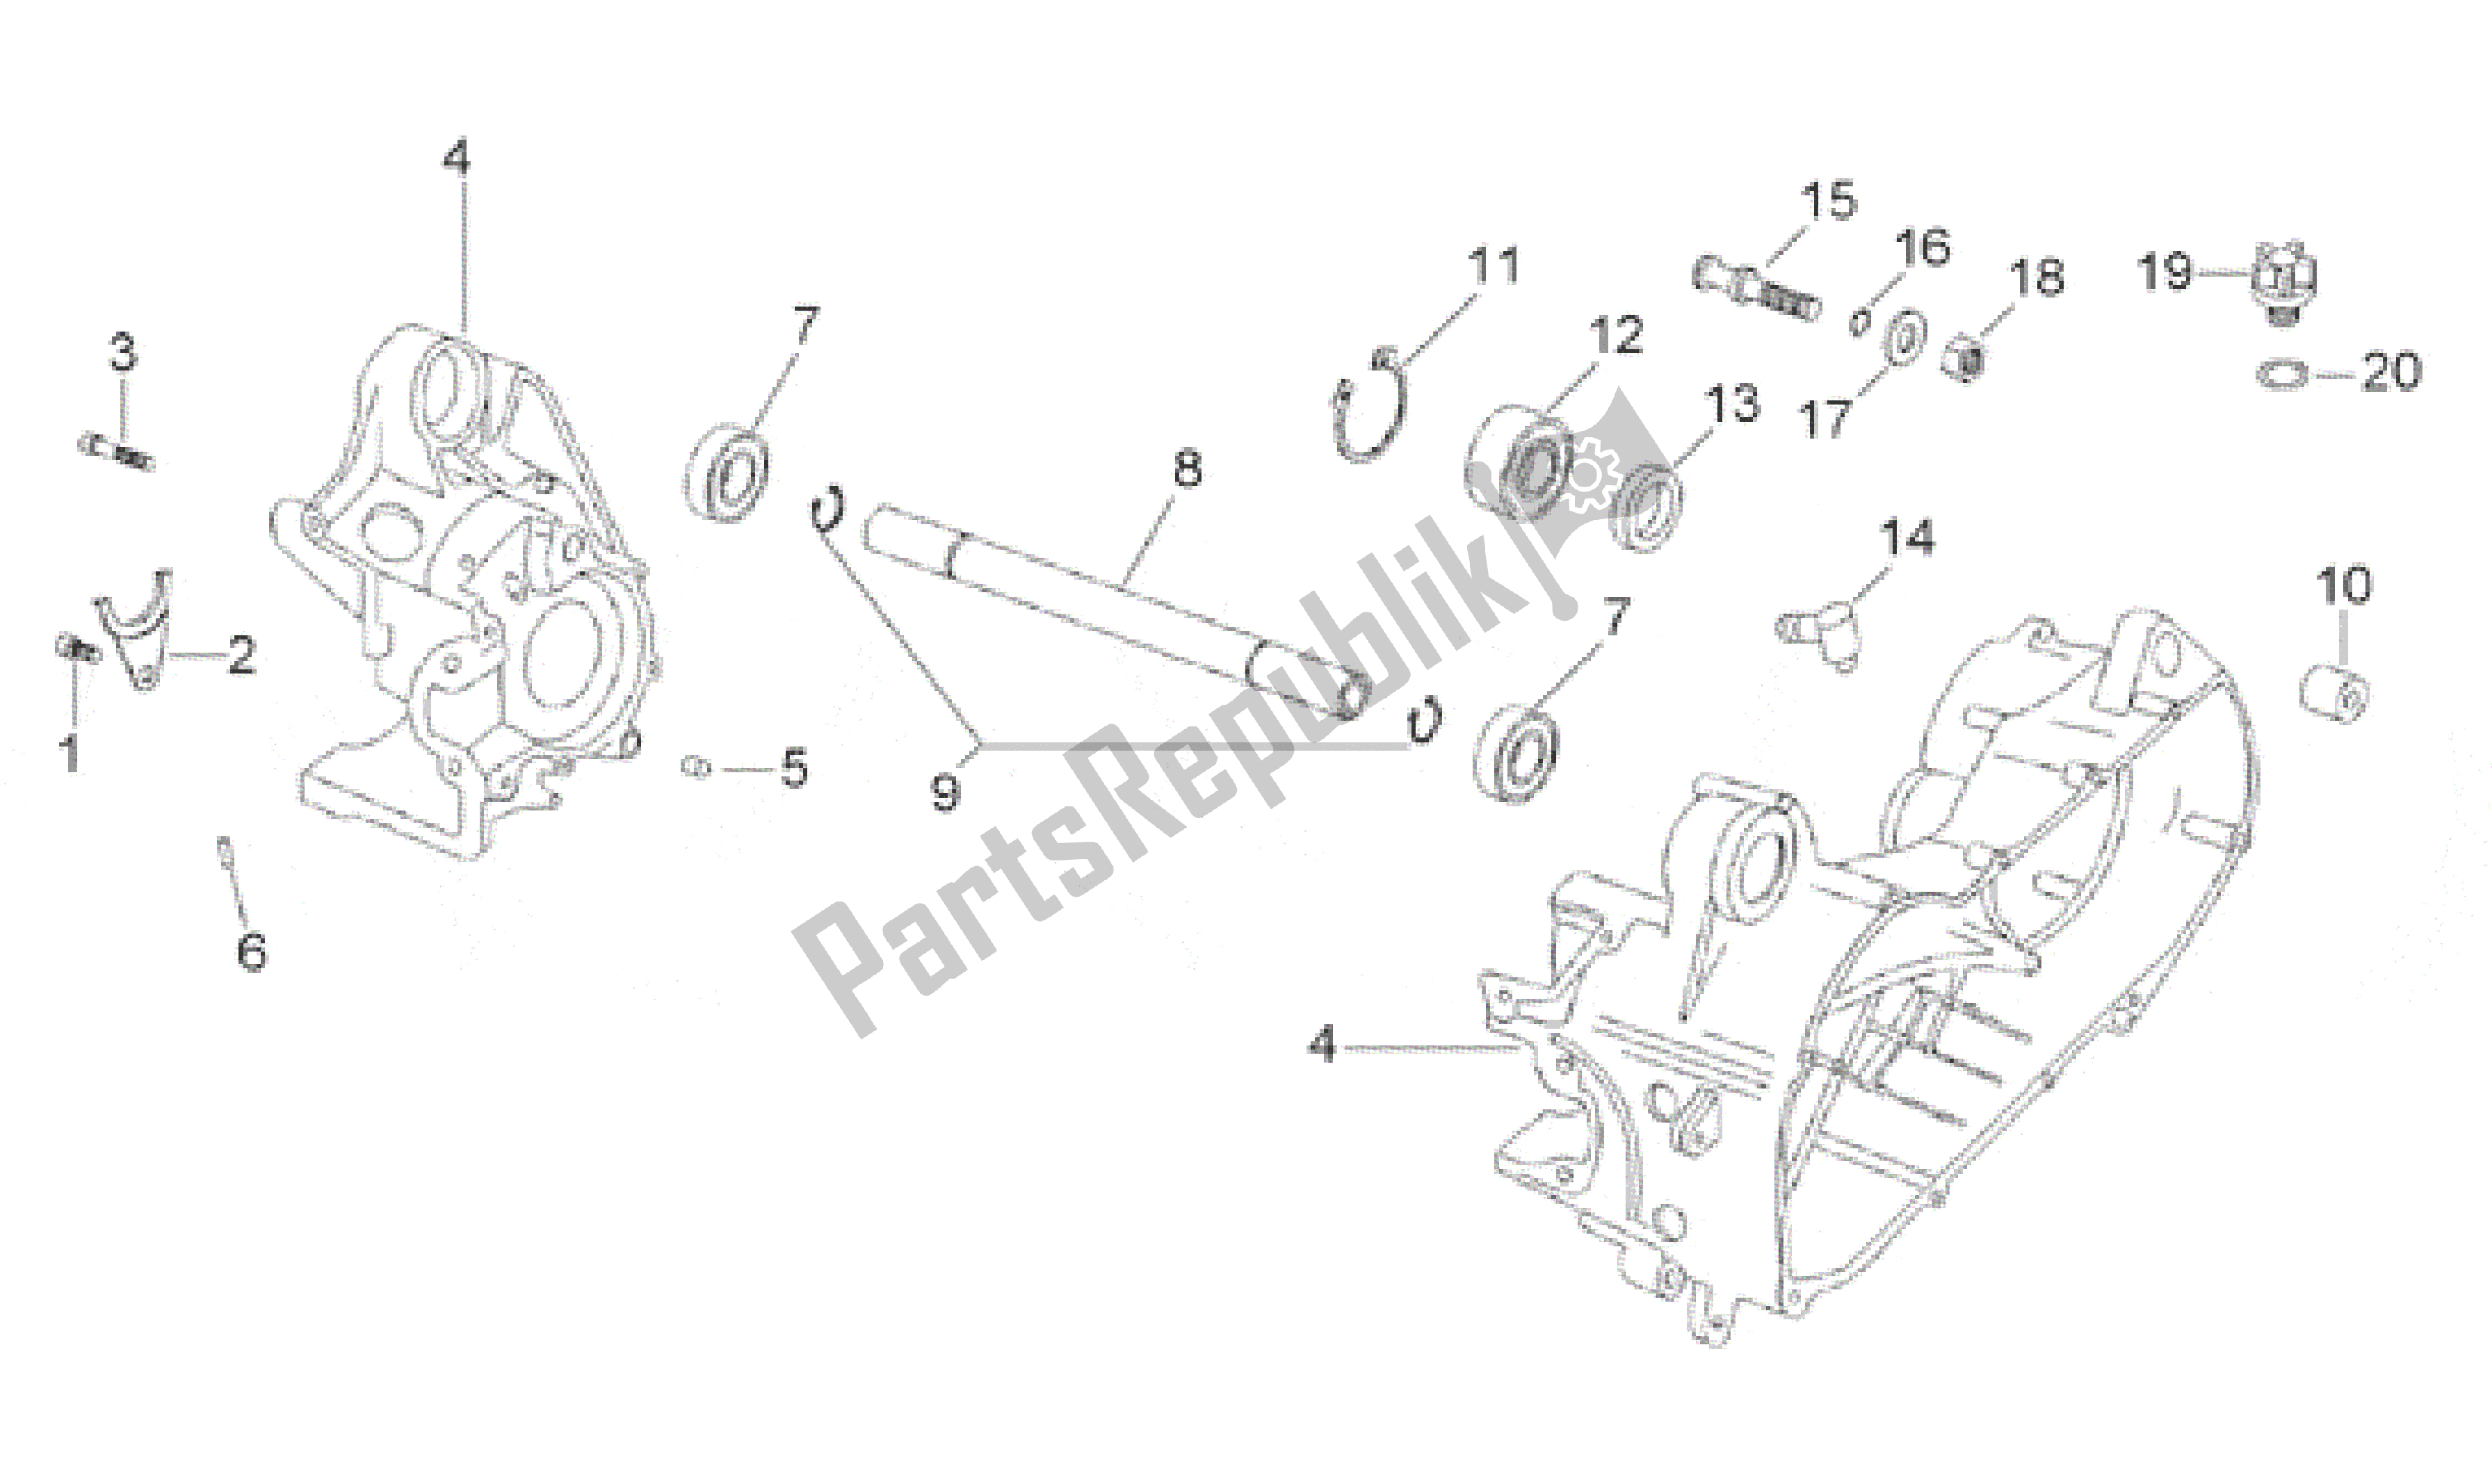 All parts for the Central Crank-case Set of the Aprilia Gulliver 50 1990 - 1995